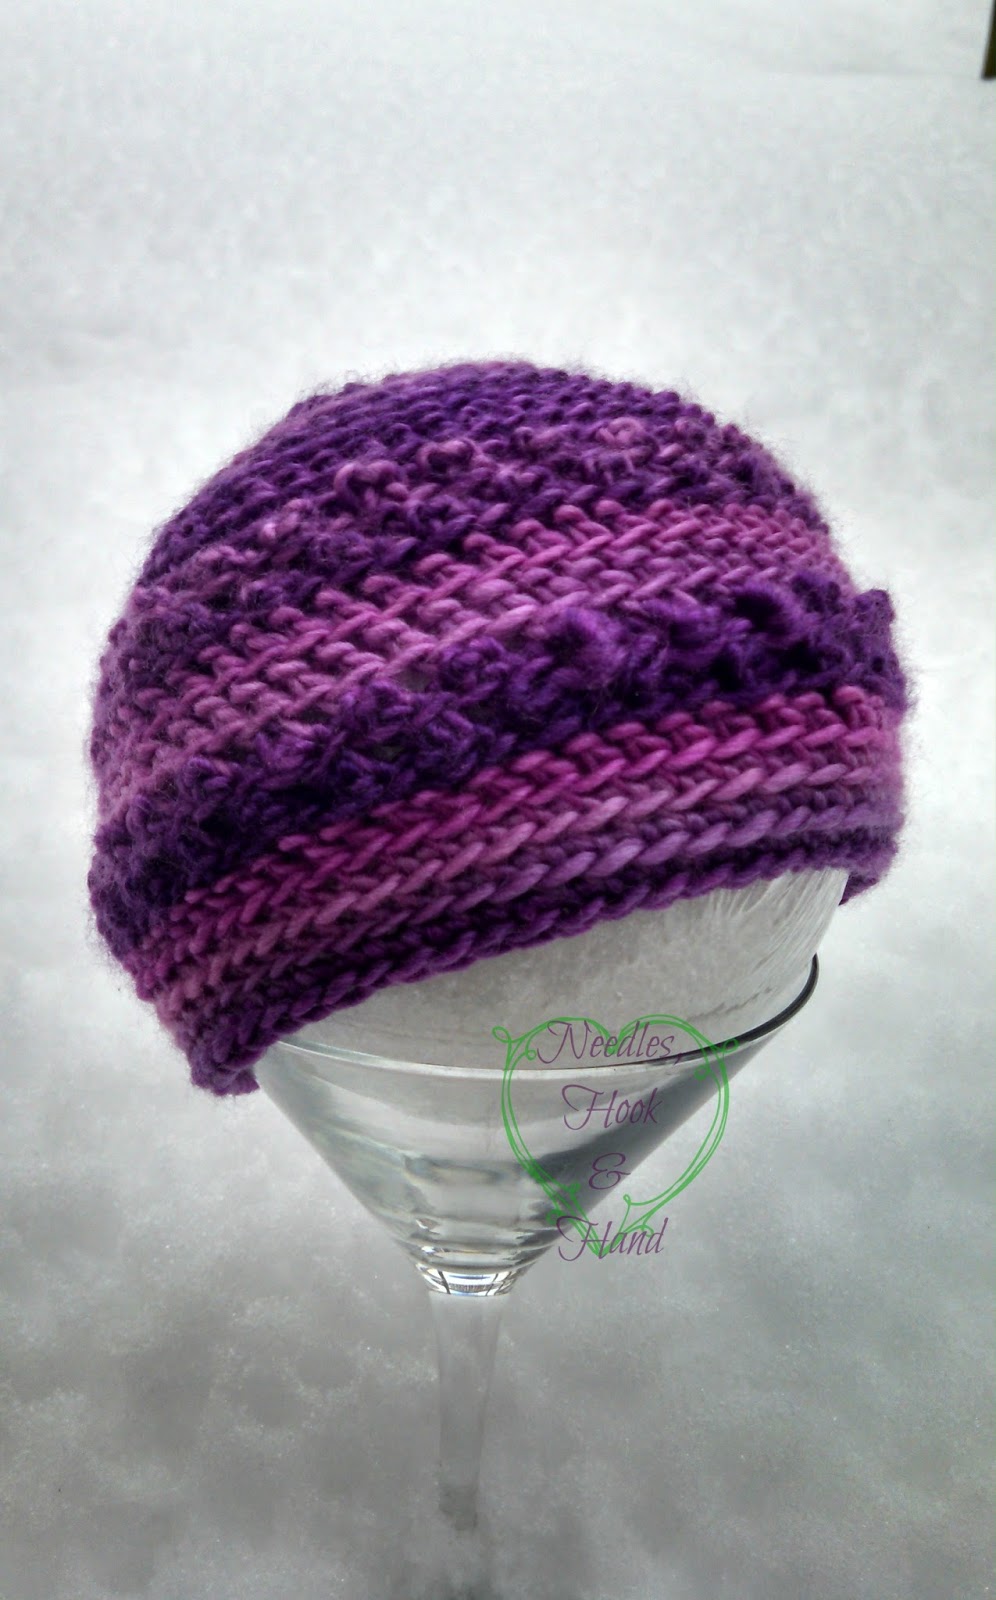 felted-button-colorful-crochet-patterns-only-just-born-hat-free